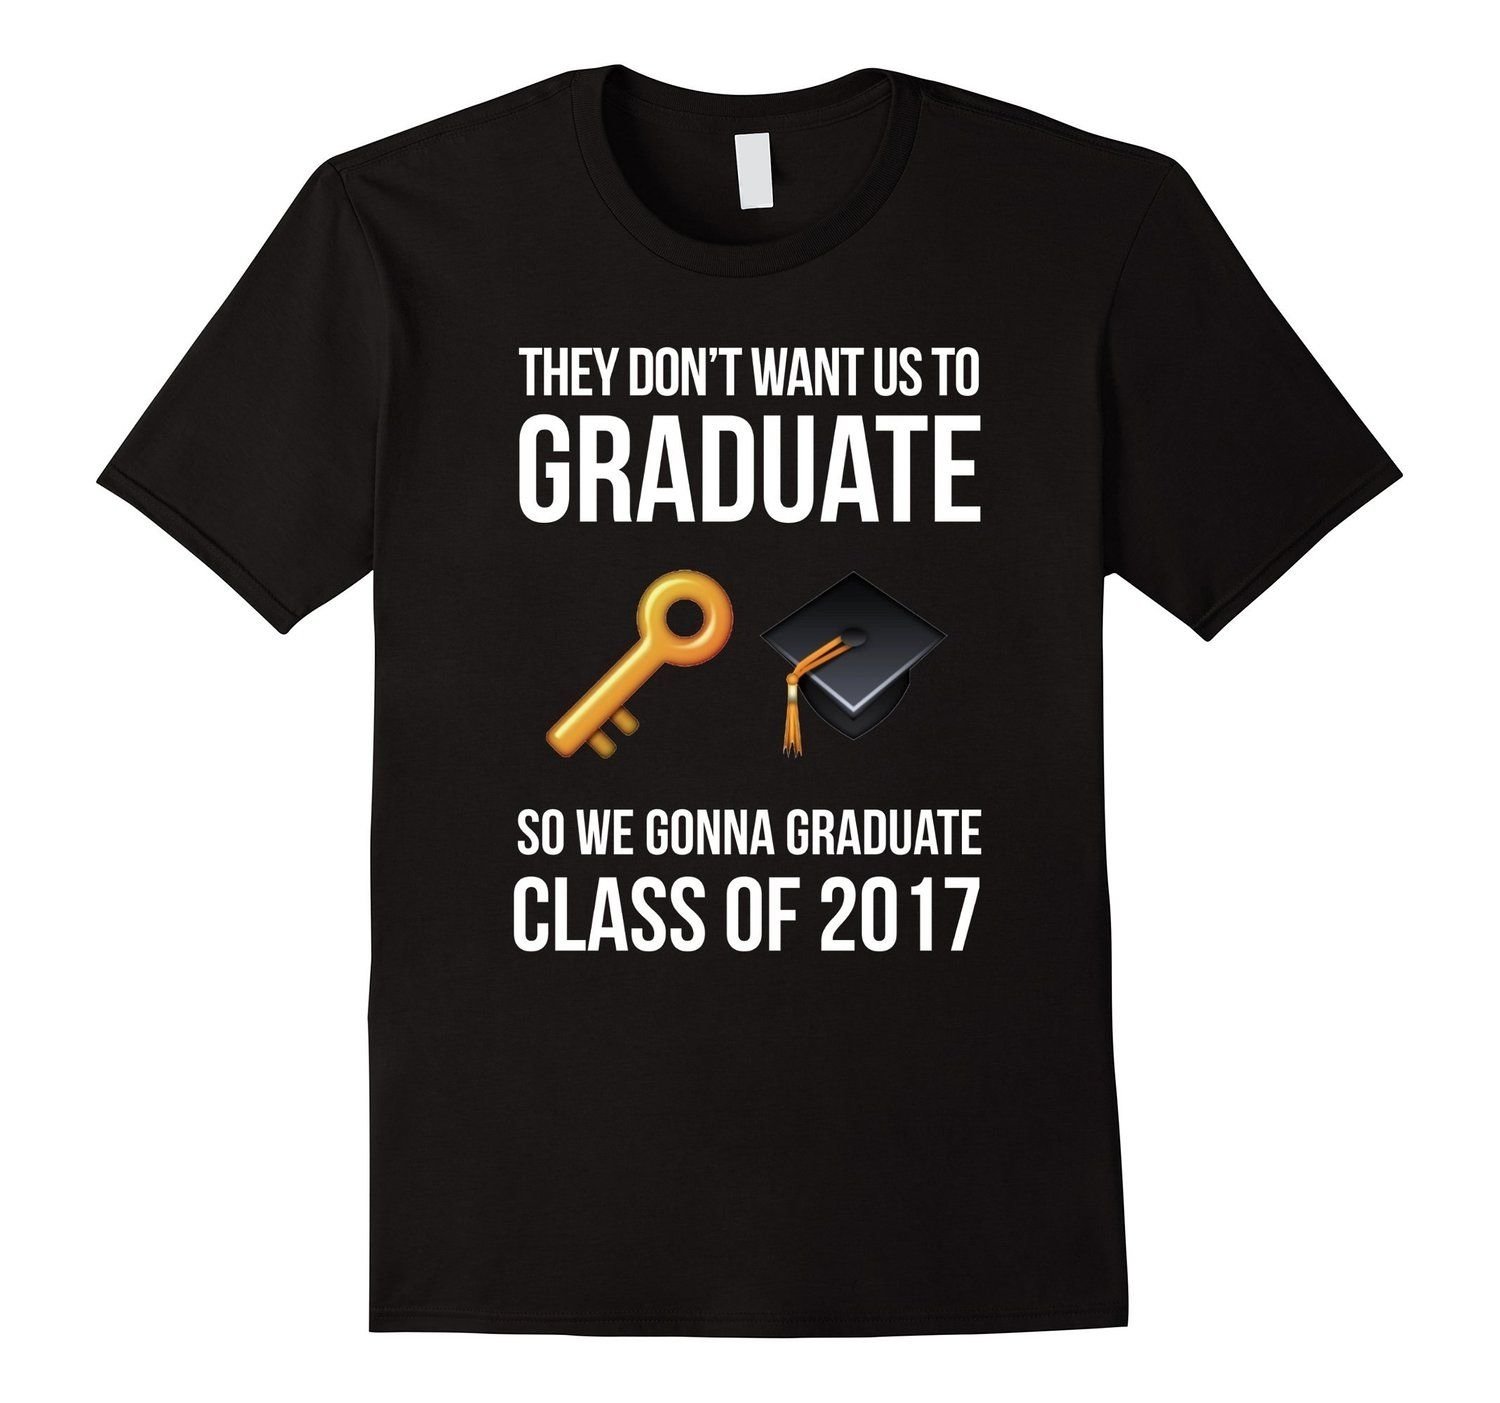 10 Lovely Senior T Shirt Ideas 2014 funny senior shirts class of 2017 they dont want us to graduate 2022